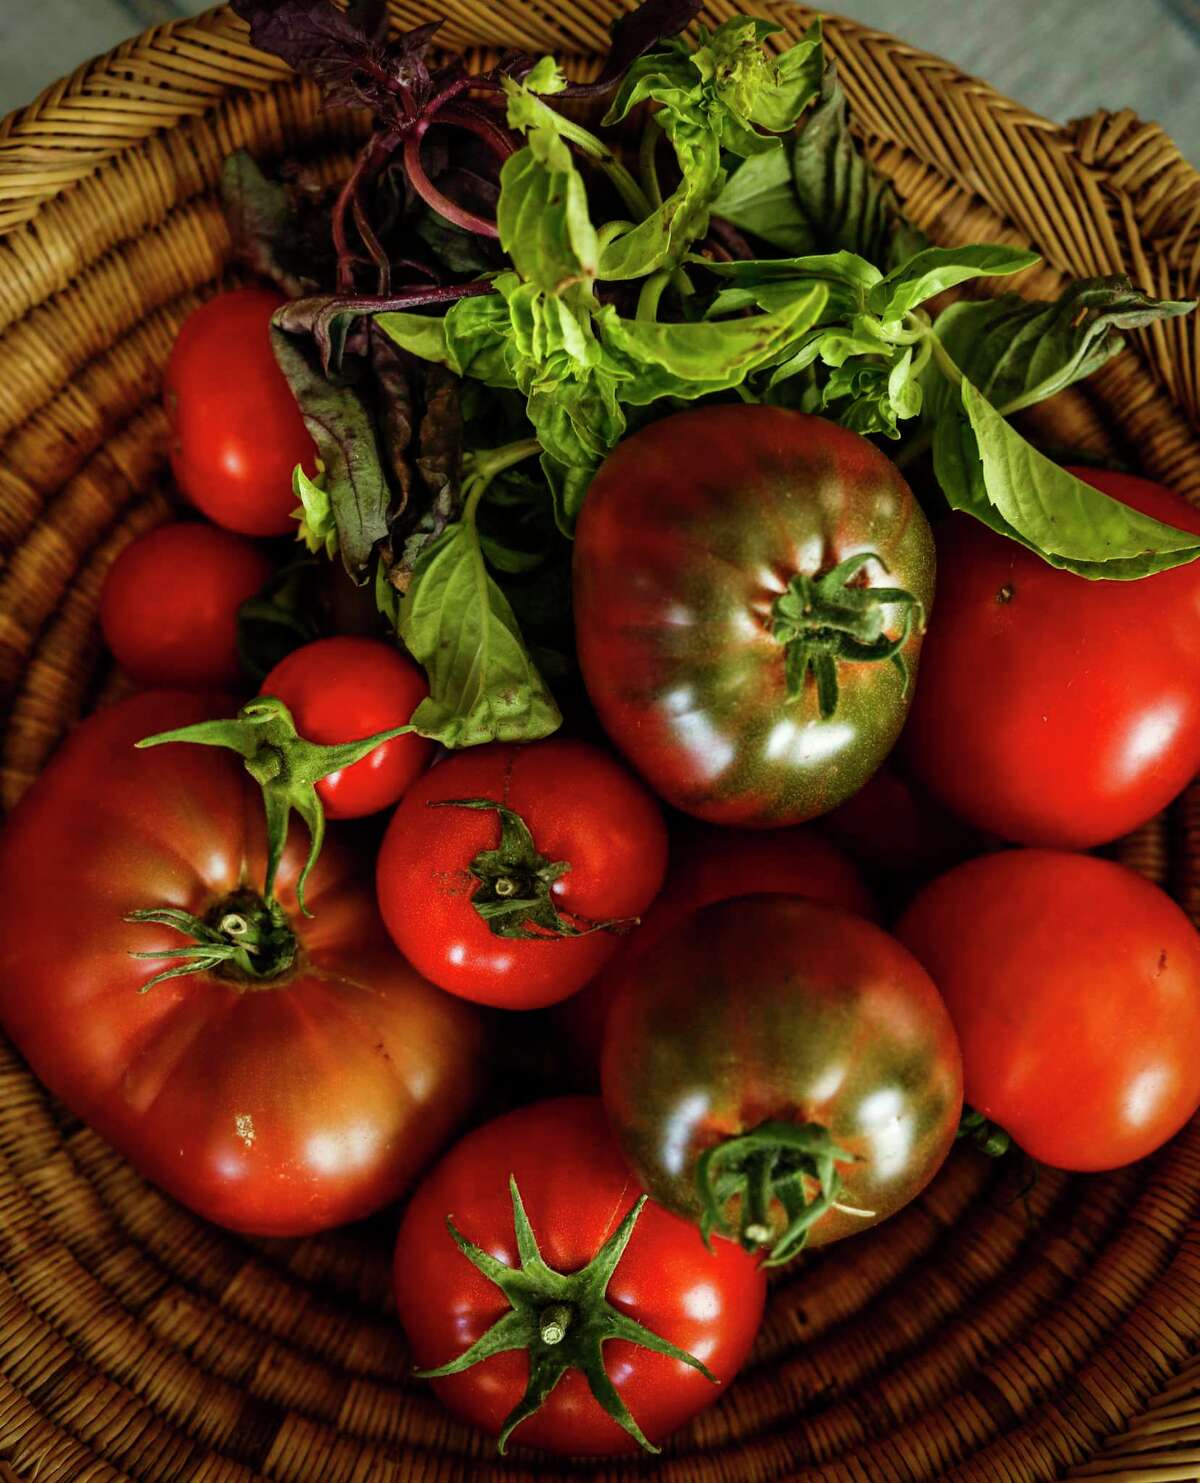 Tomatoes and basil complement each other on the plate and in the garden.